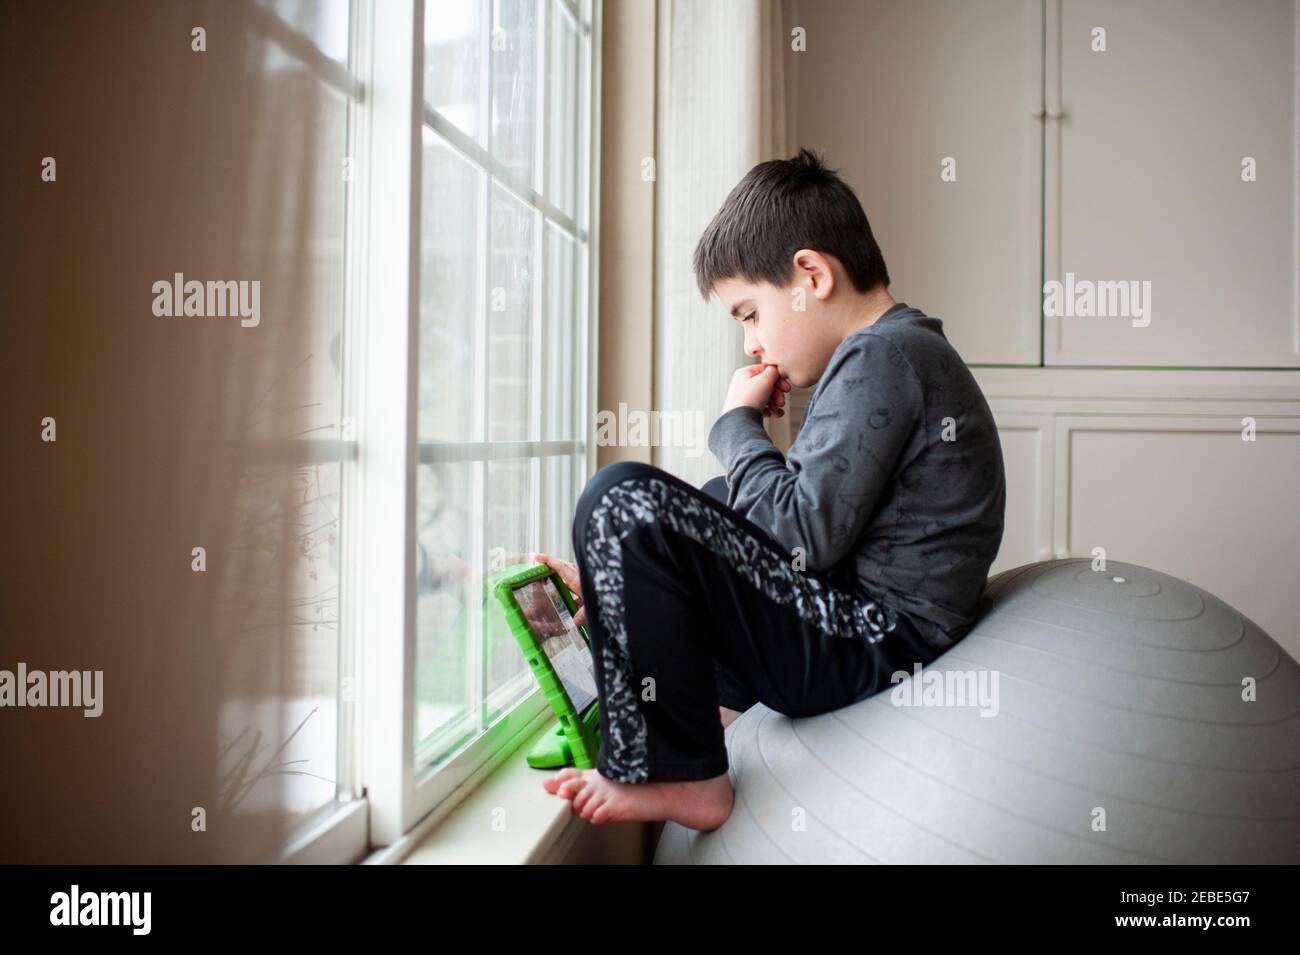 Boy 9-10 years old sits on exercise ball playing with his tablet Stock Photo